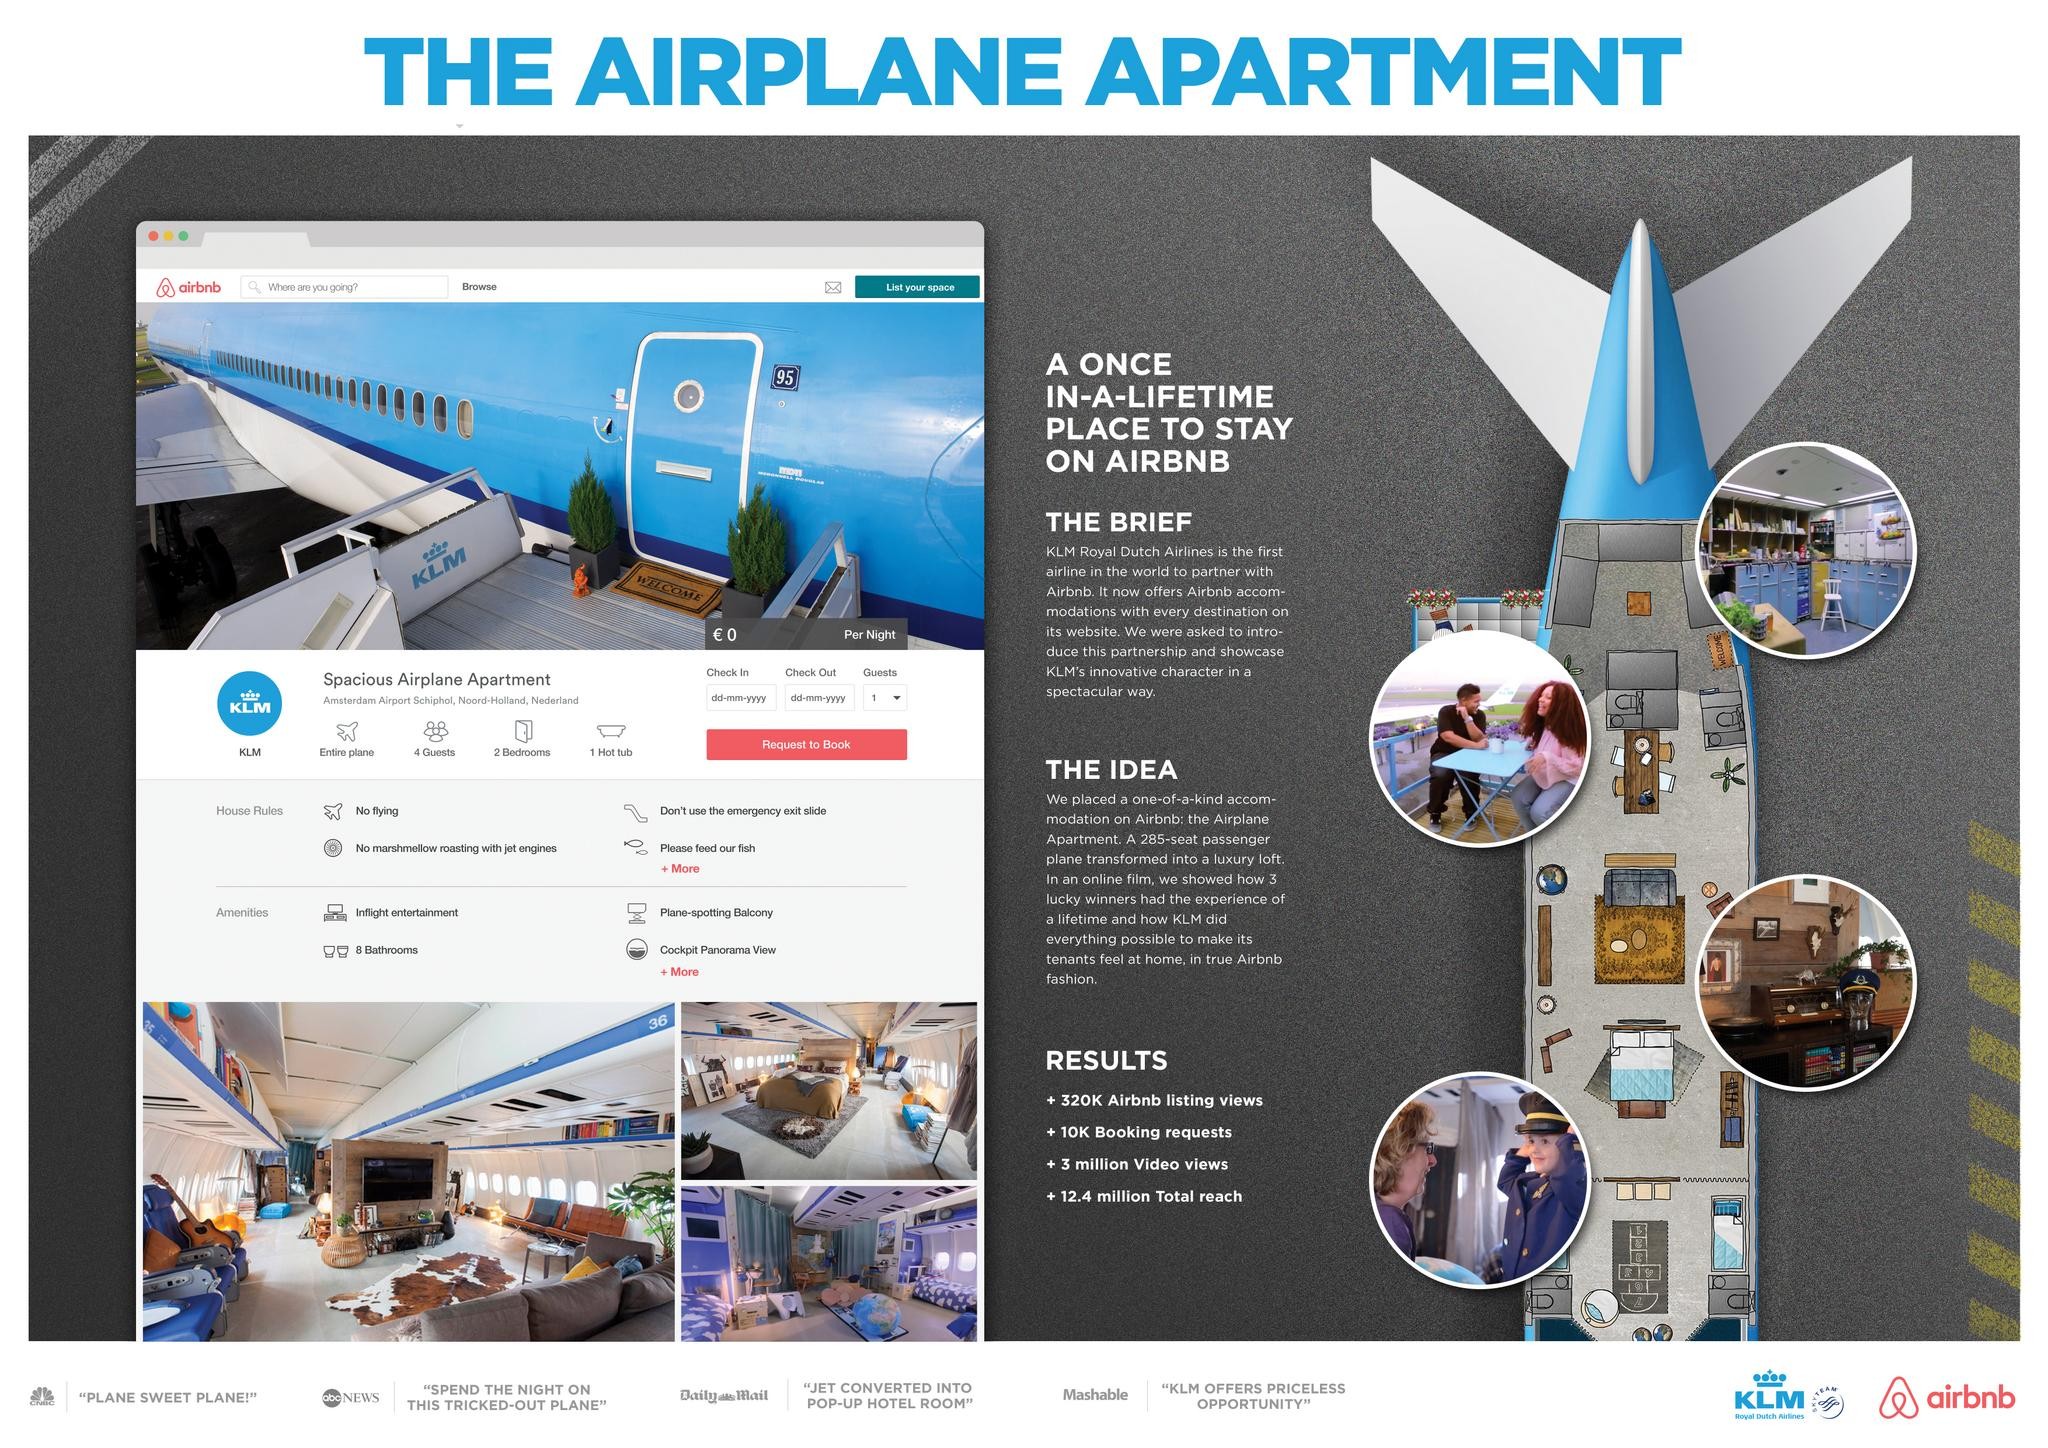 THE AIRPLANE APARTMENT